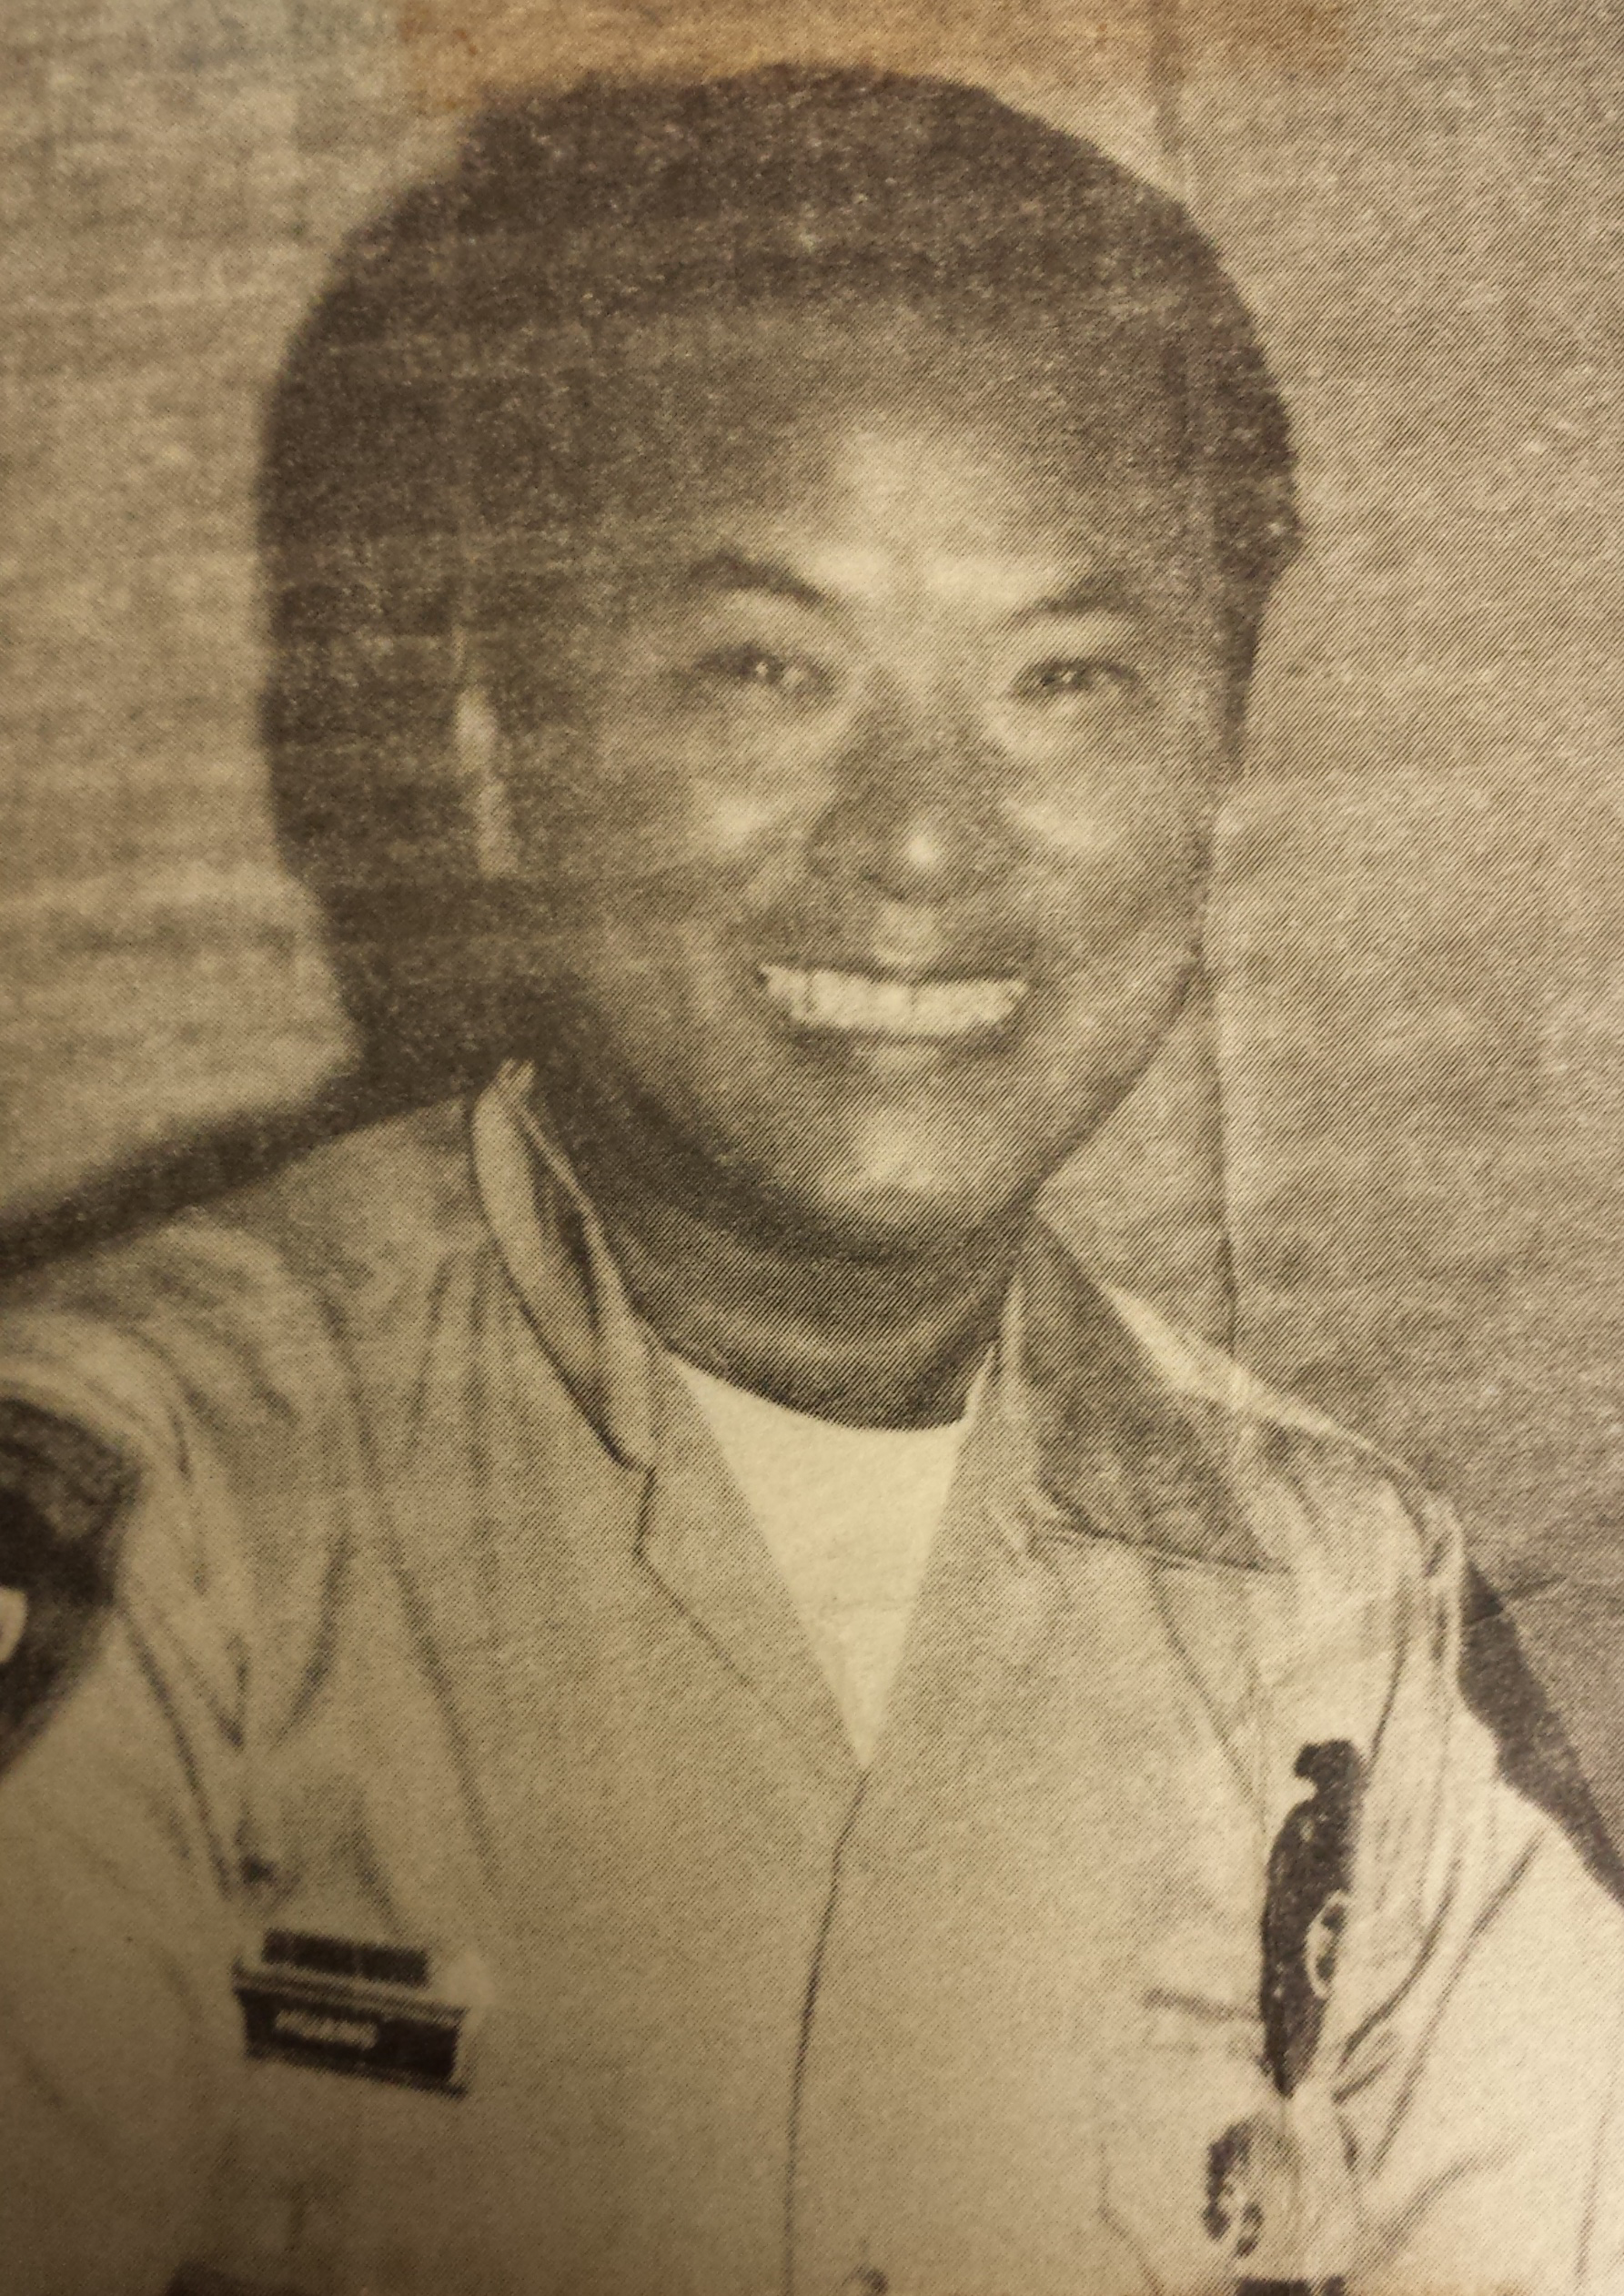 Park Police Officer Howard Shao Wai Huang | Los Angeles County Department of Parks and Recreation Police, California